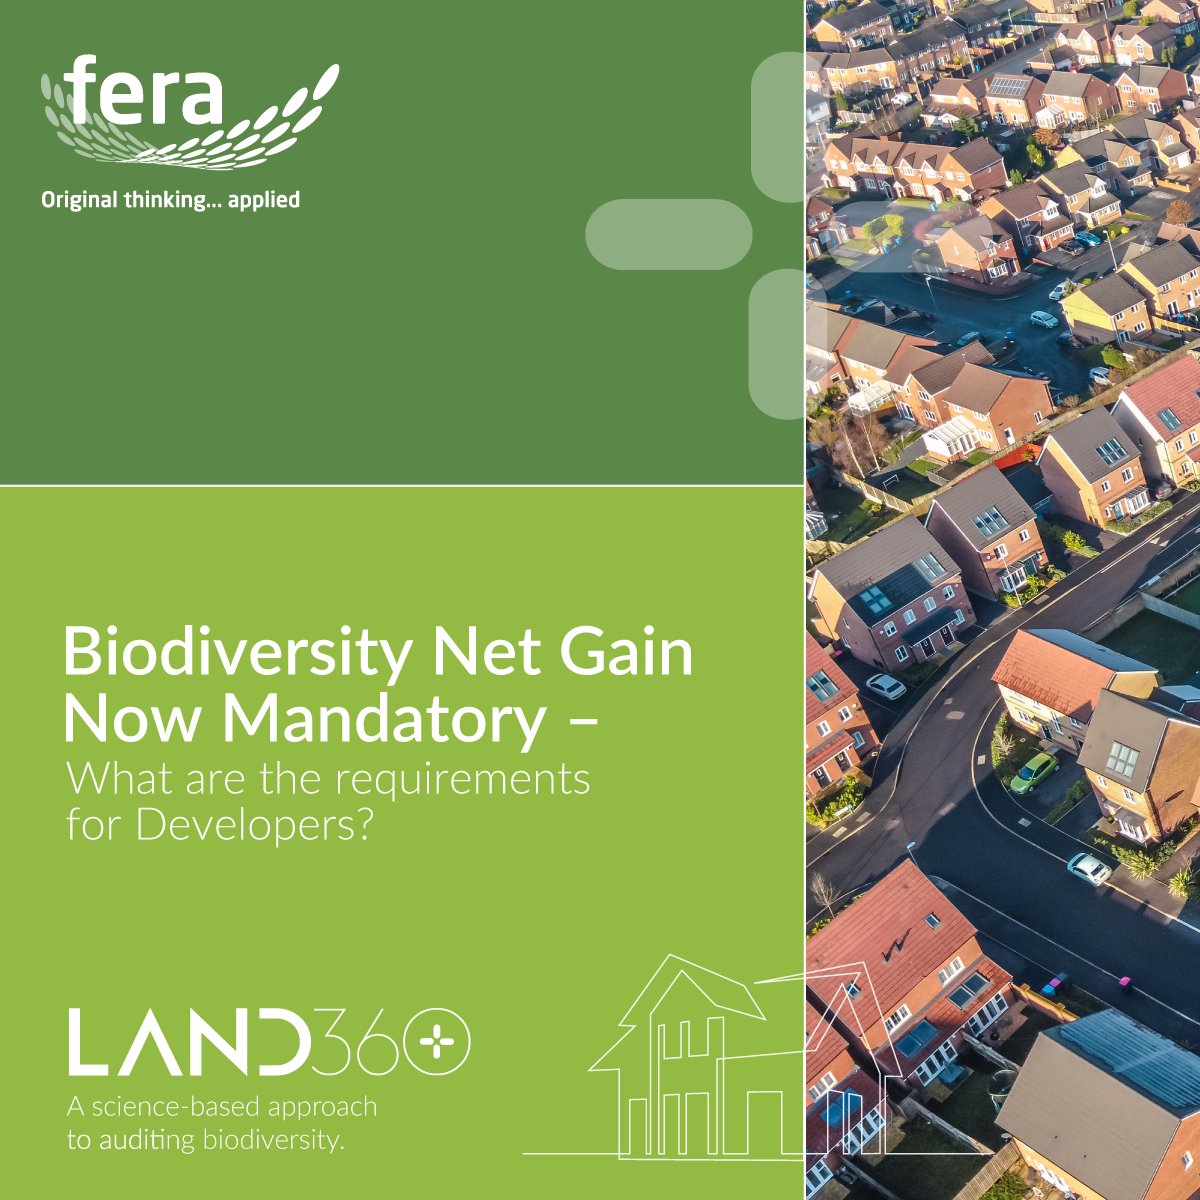 Biodiversity net gain becomes mandatory 🌿 From today, all major developments must achieve a 10% Biodiversity Net Gain. Read about what this might mean for you: hubs.ly/Q02kGhpX0 #LAND360 #BNG #SustainableDevelopment #BiodiversityInConstruction